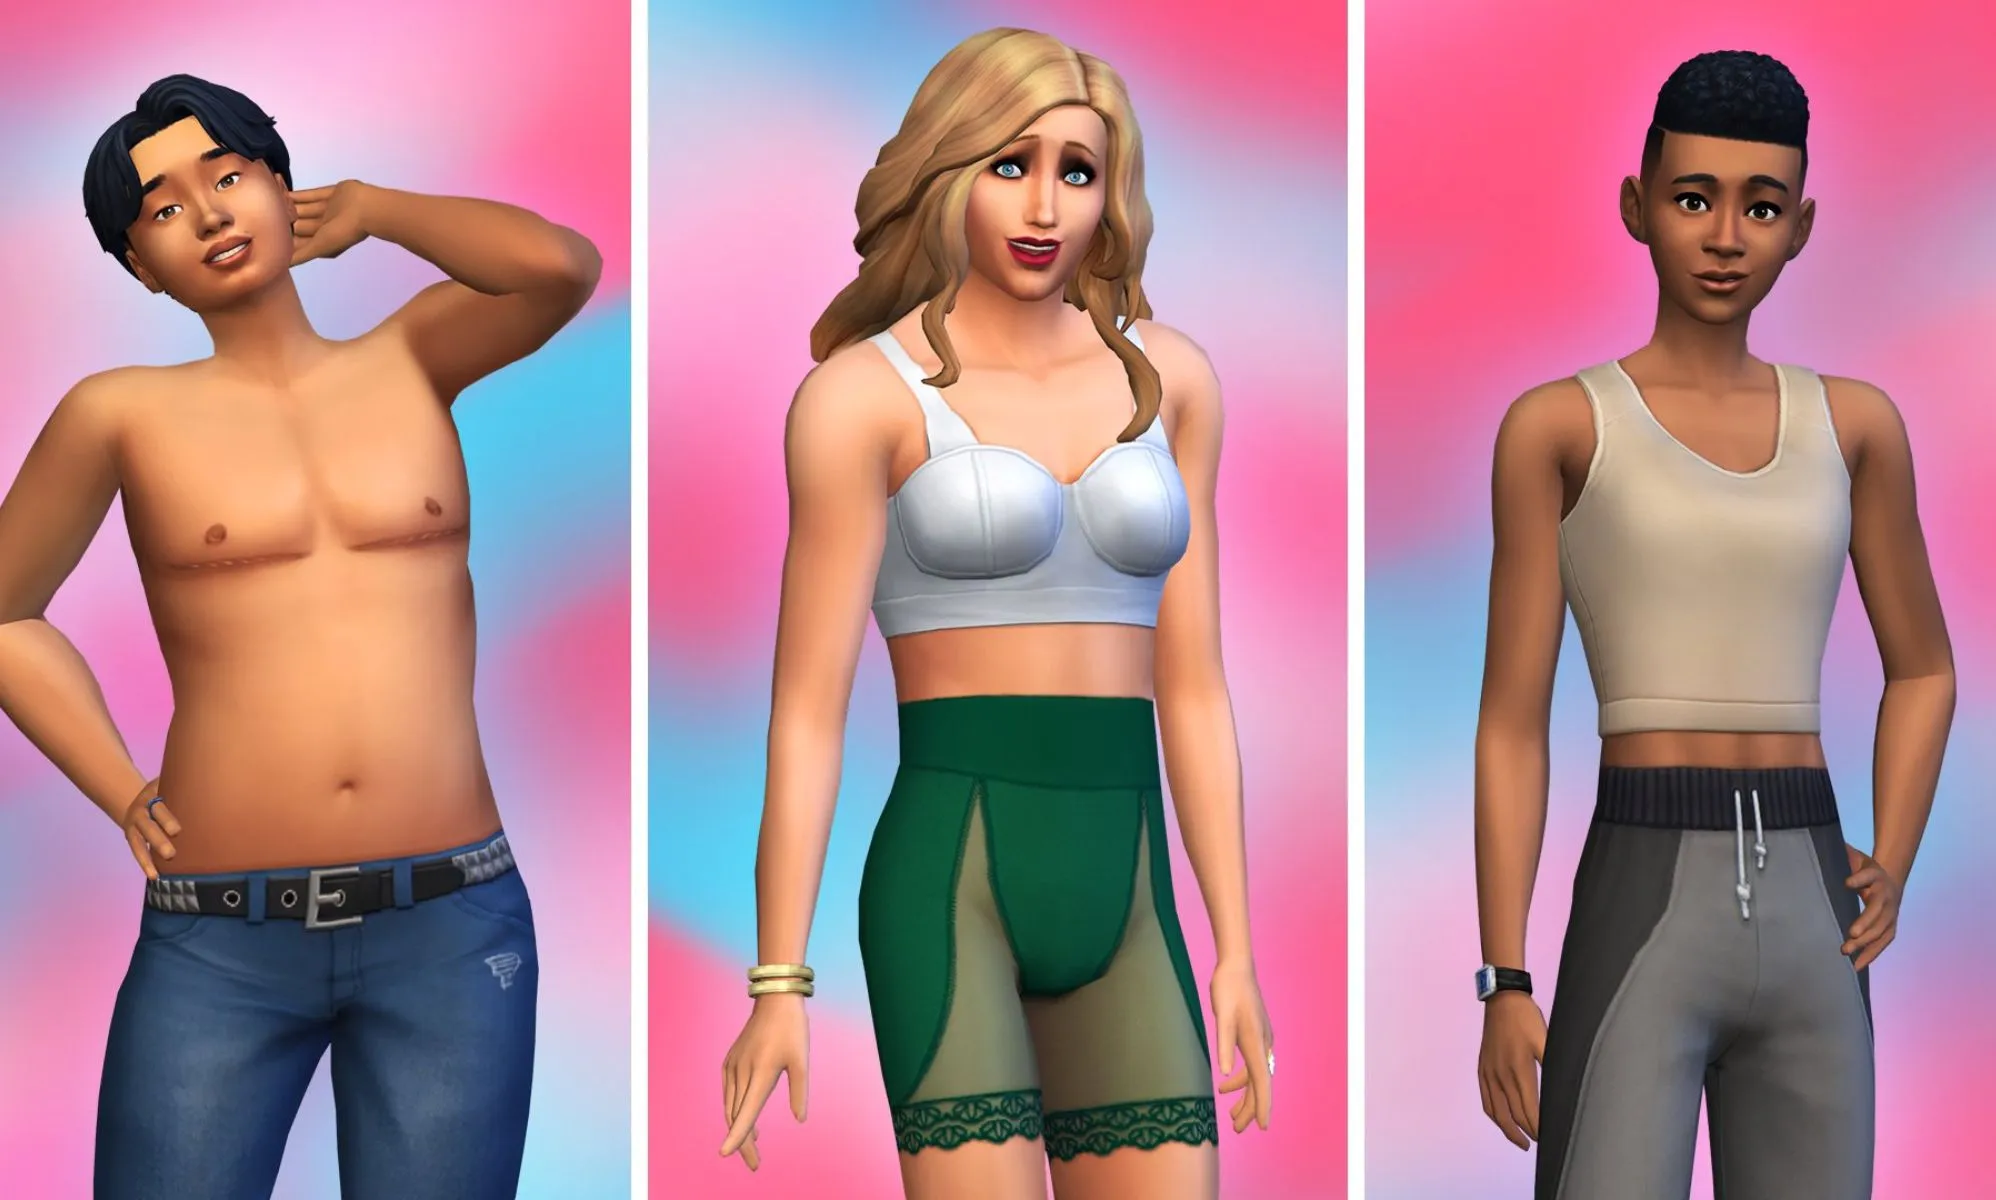 Build-A-Youth: The Sims 4's Character Creator Demo